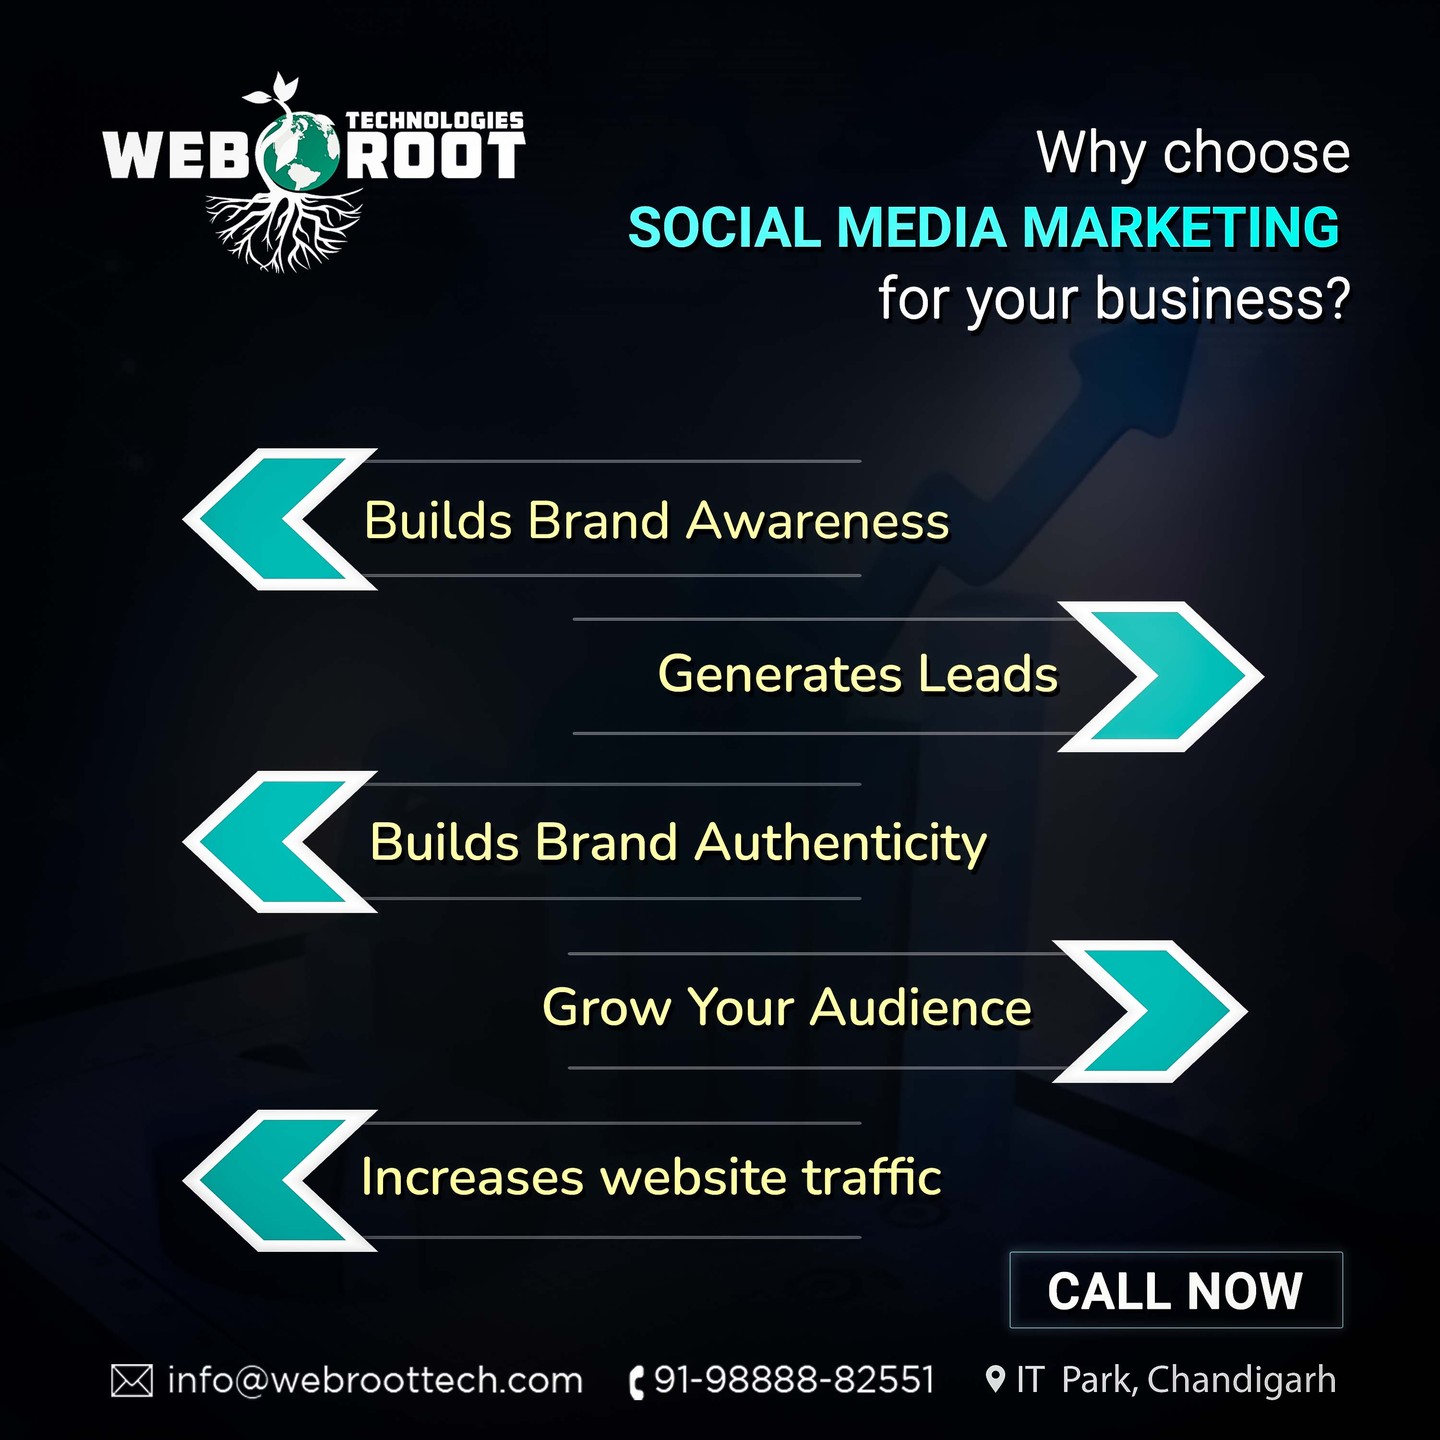 Using social media marketing can provide a business with an incredible opportunity to:

Build Brand Awareness
Generate Leads
Establish the Brand Authority
Grow Your Audience
Increase The Website Traffic

Get A Quote Today!
📞: +91-9888882551
📧: info@webroottech.com
🌐: https://webroottech.com

#marketing #ads #facebookads #instagramads #paidads #webdesign #digitalmarketing #branding #socialmedia #entrepreneur #socialmediamarketing #advertising #o #smallbusiness #webroottech #graphicdesign #marketingstrategy #seo #digital #entrepreneurship #onlinemarketing #marketingtips #startup #searchenginemarketing #marketingstrategy #marketingagency #marketingcompany